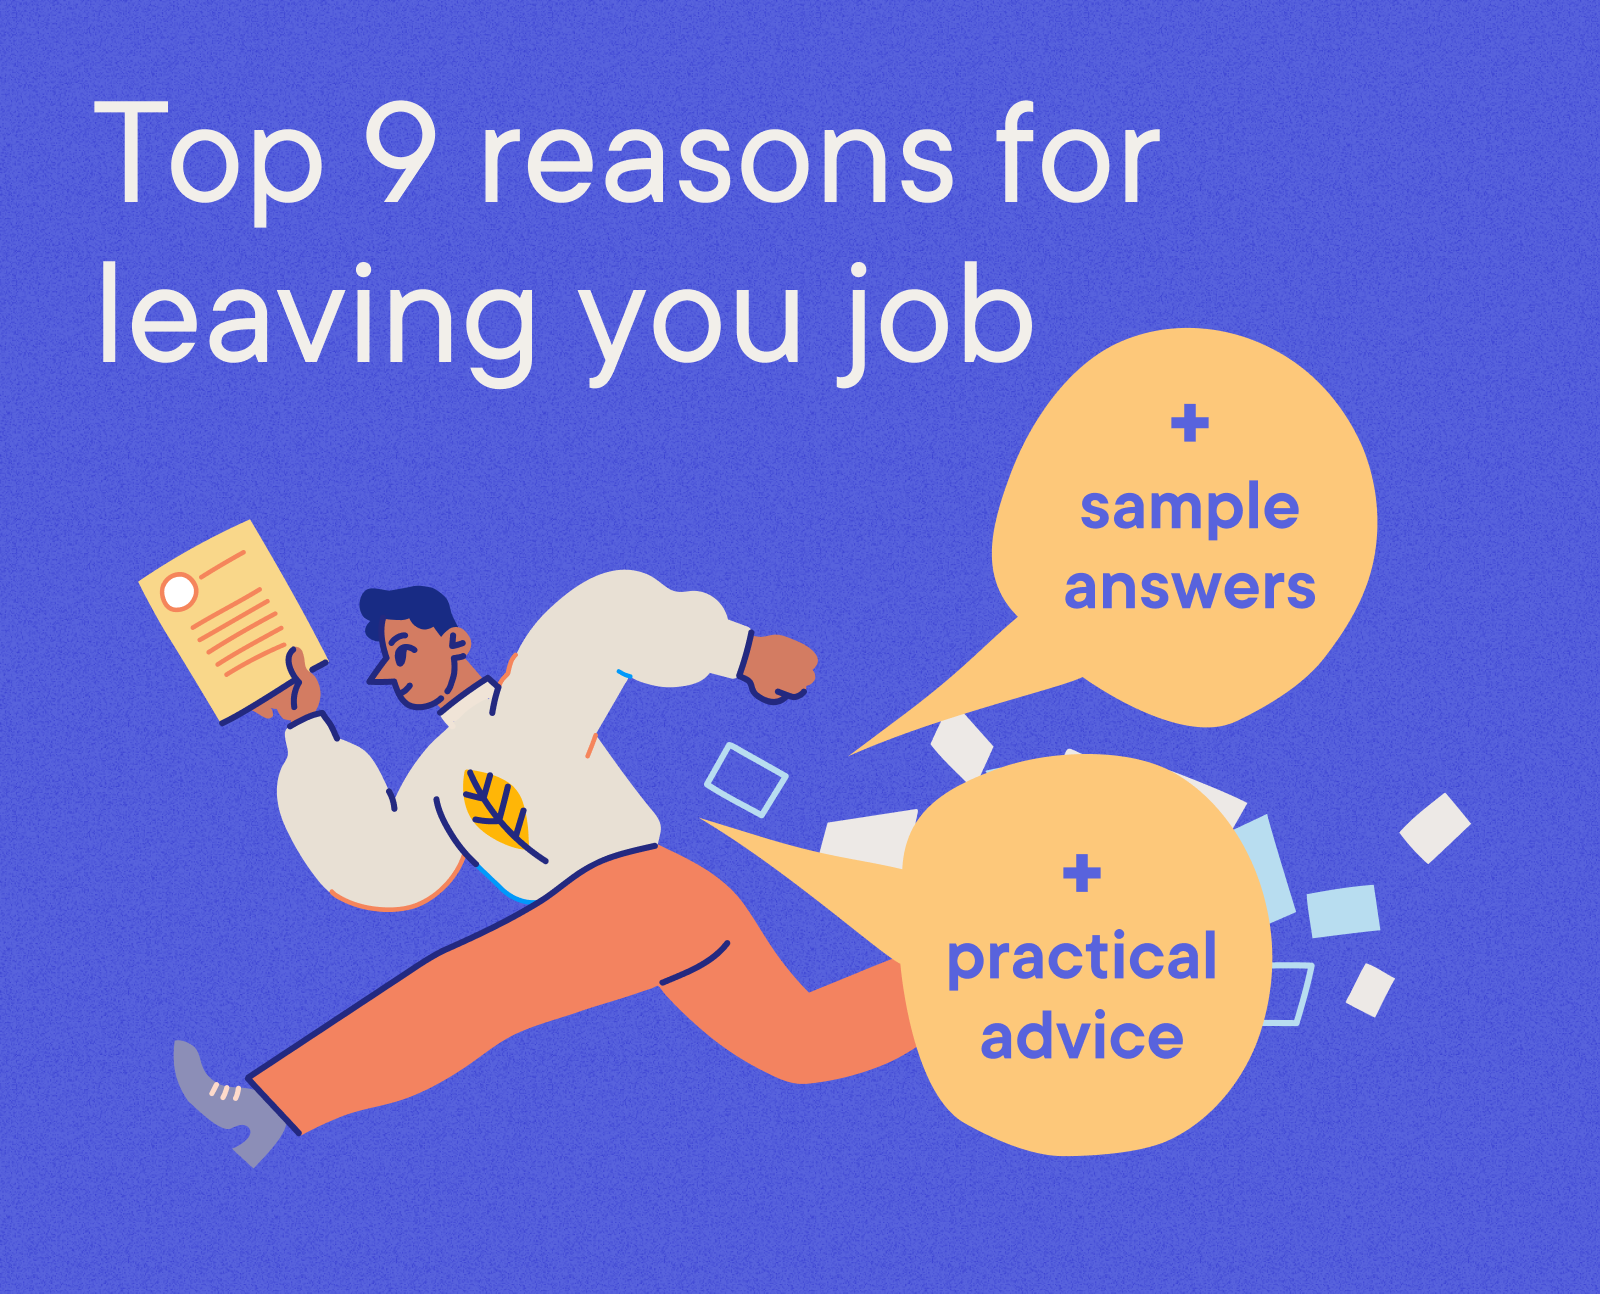 Blog - Why did you leave your last job - Top 9 reasons for leaving you job